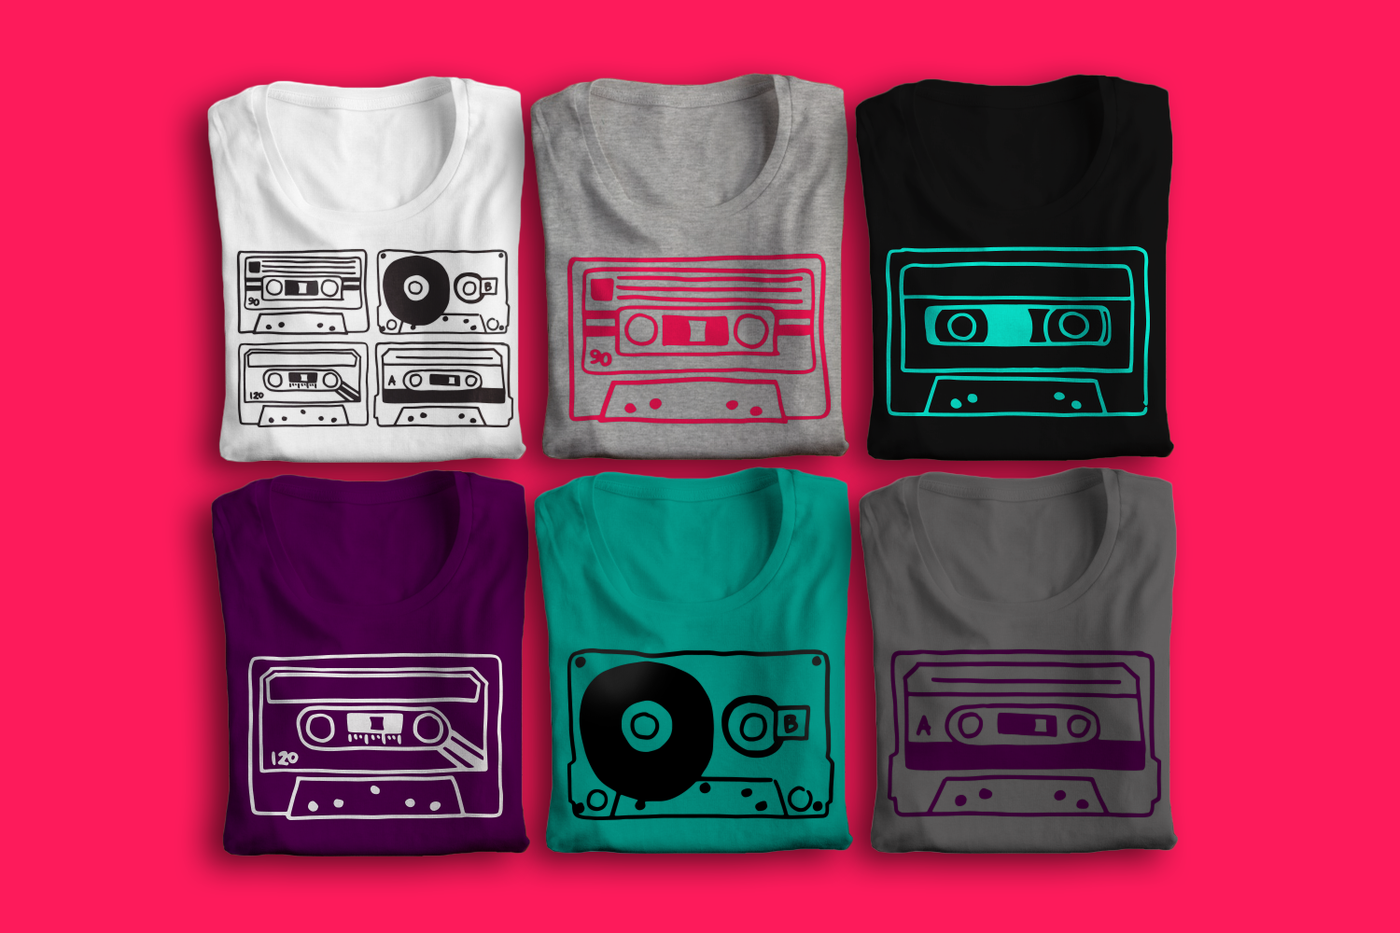 Six folded tees, each with a different mix tape design in a hand drawn style.